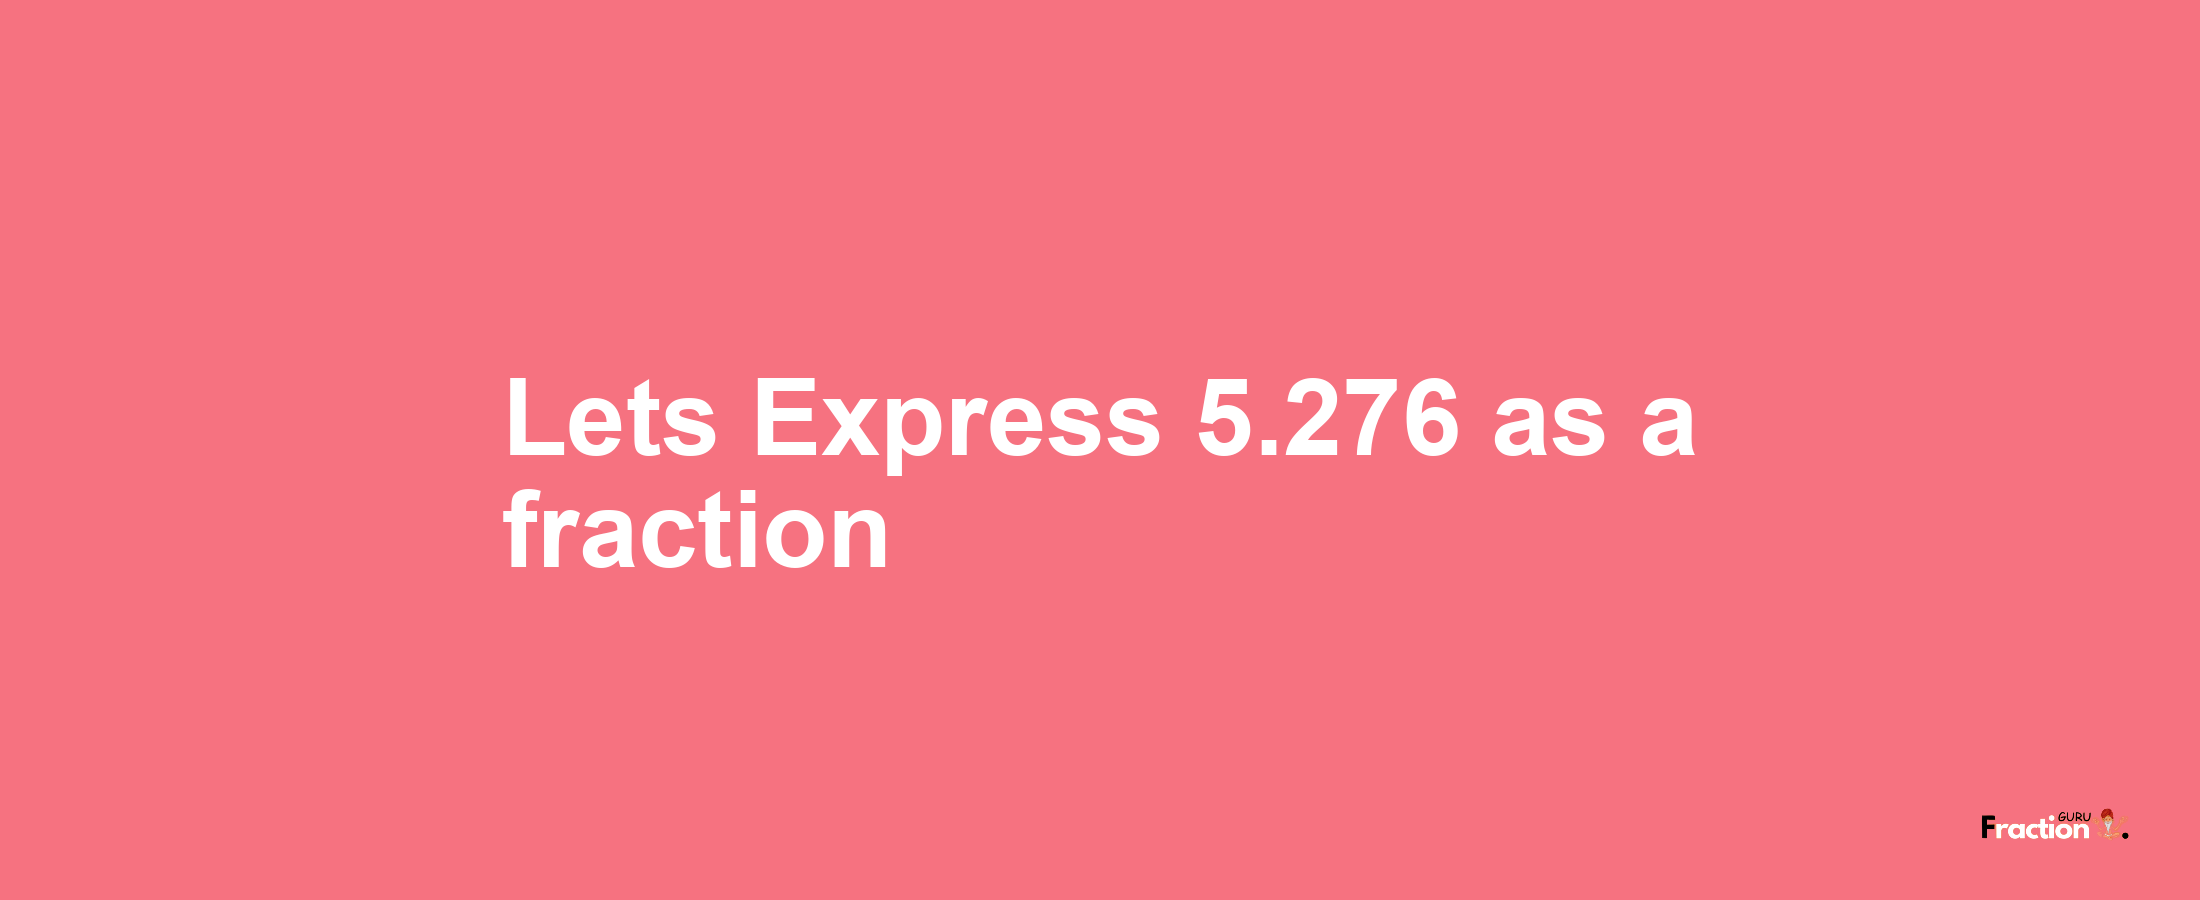 Lets Express 5.276 as afraction